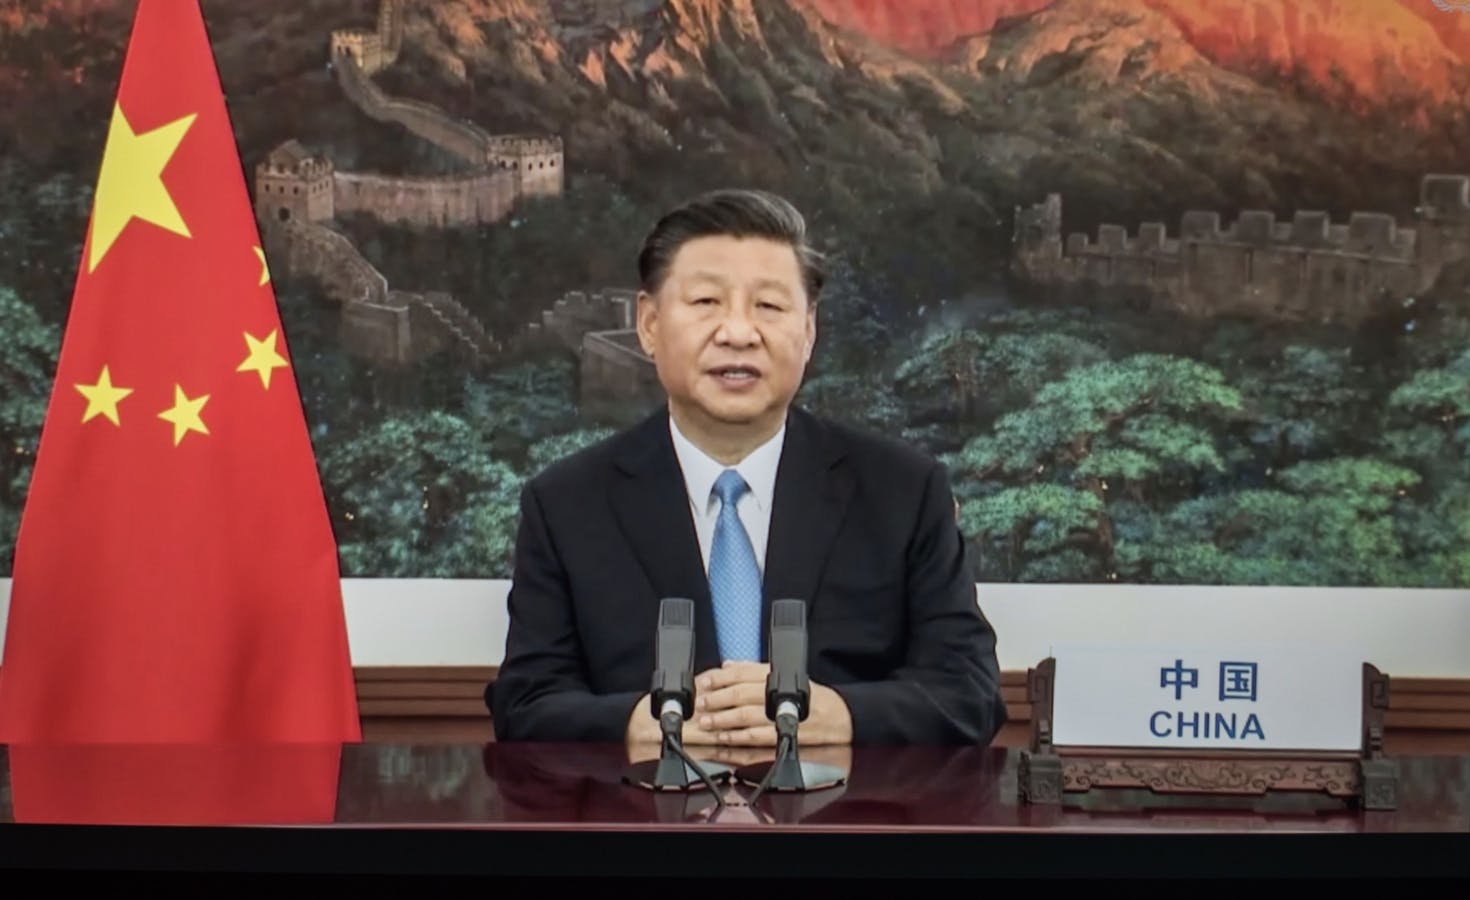 Xi Jinping, China's president. Photo by Bloomberg. 